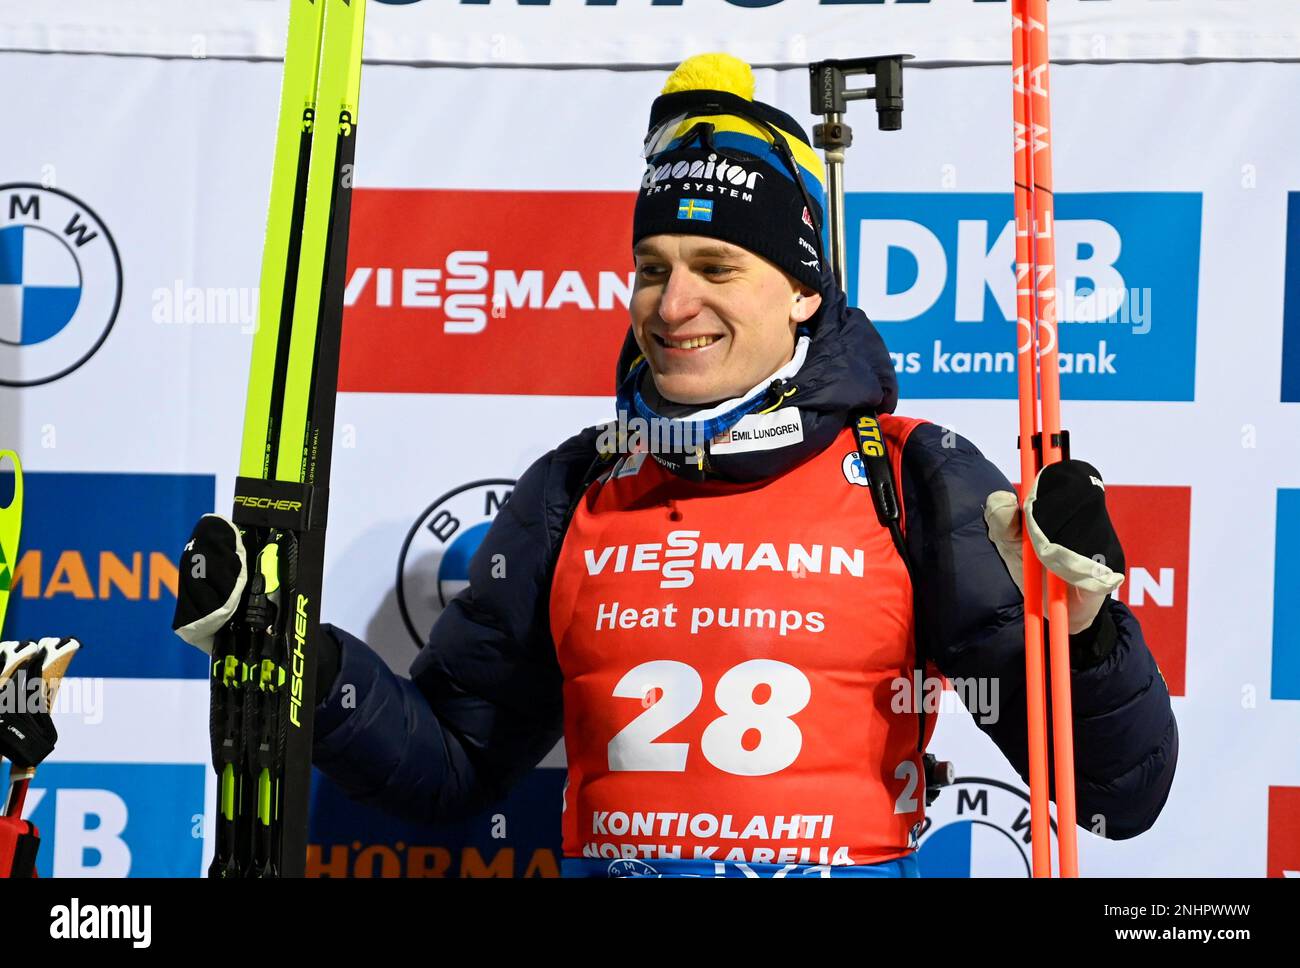 Winner Martin Ponsiluoma of Sweden celebrates on podium after the mens individual 20 km event of the IBU World Cup Biathlon in Kontiolahti, Eastern Finland on Tuesday, Nov